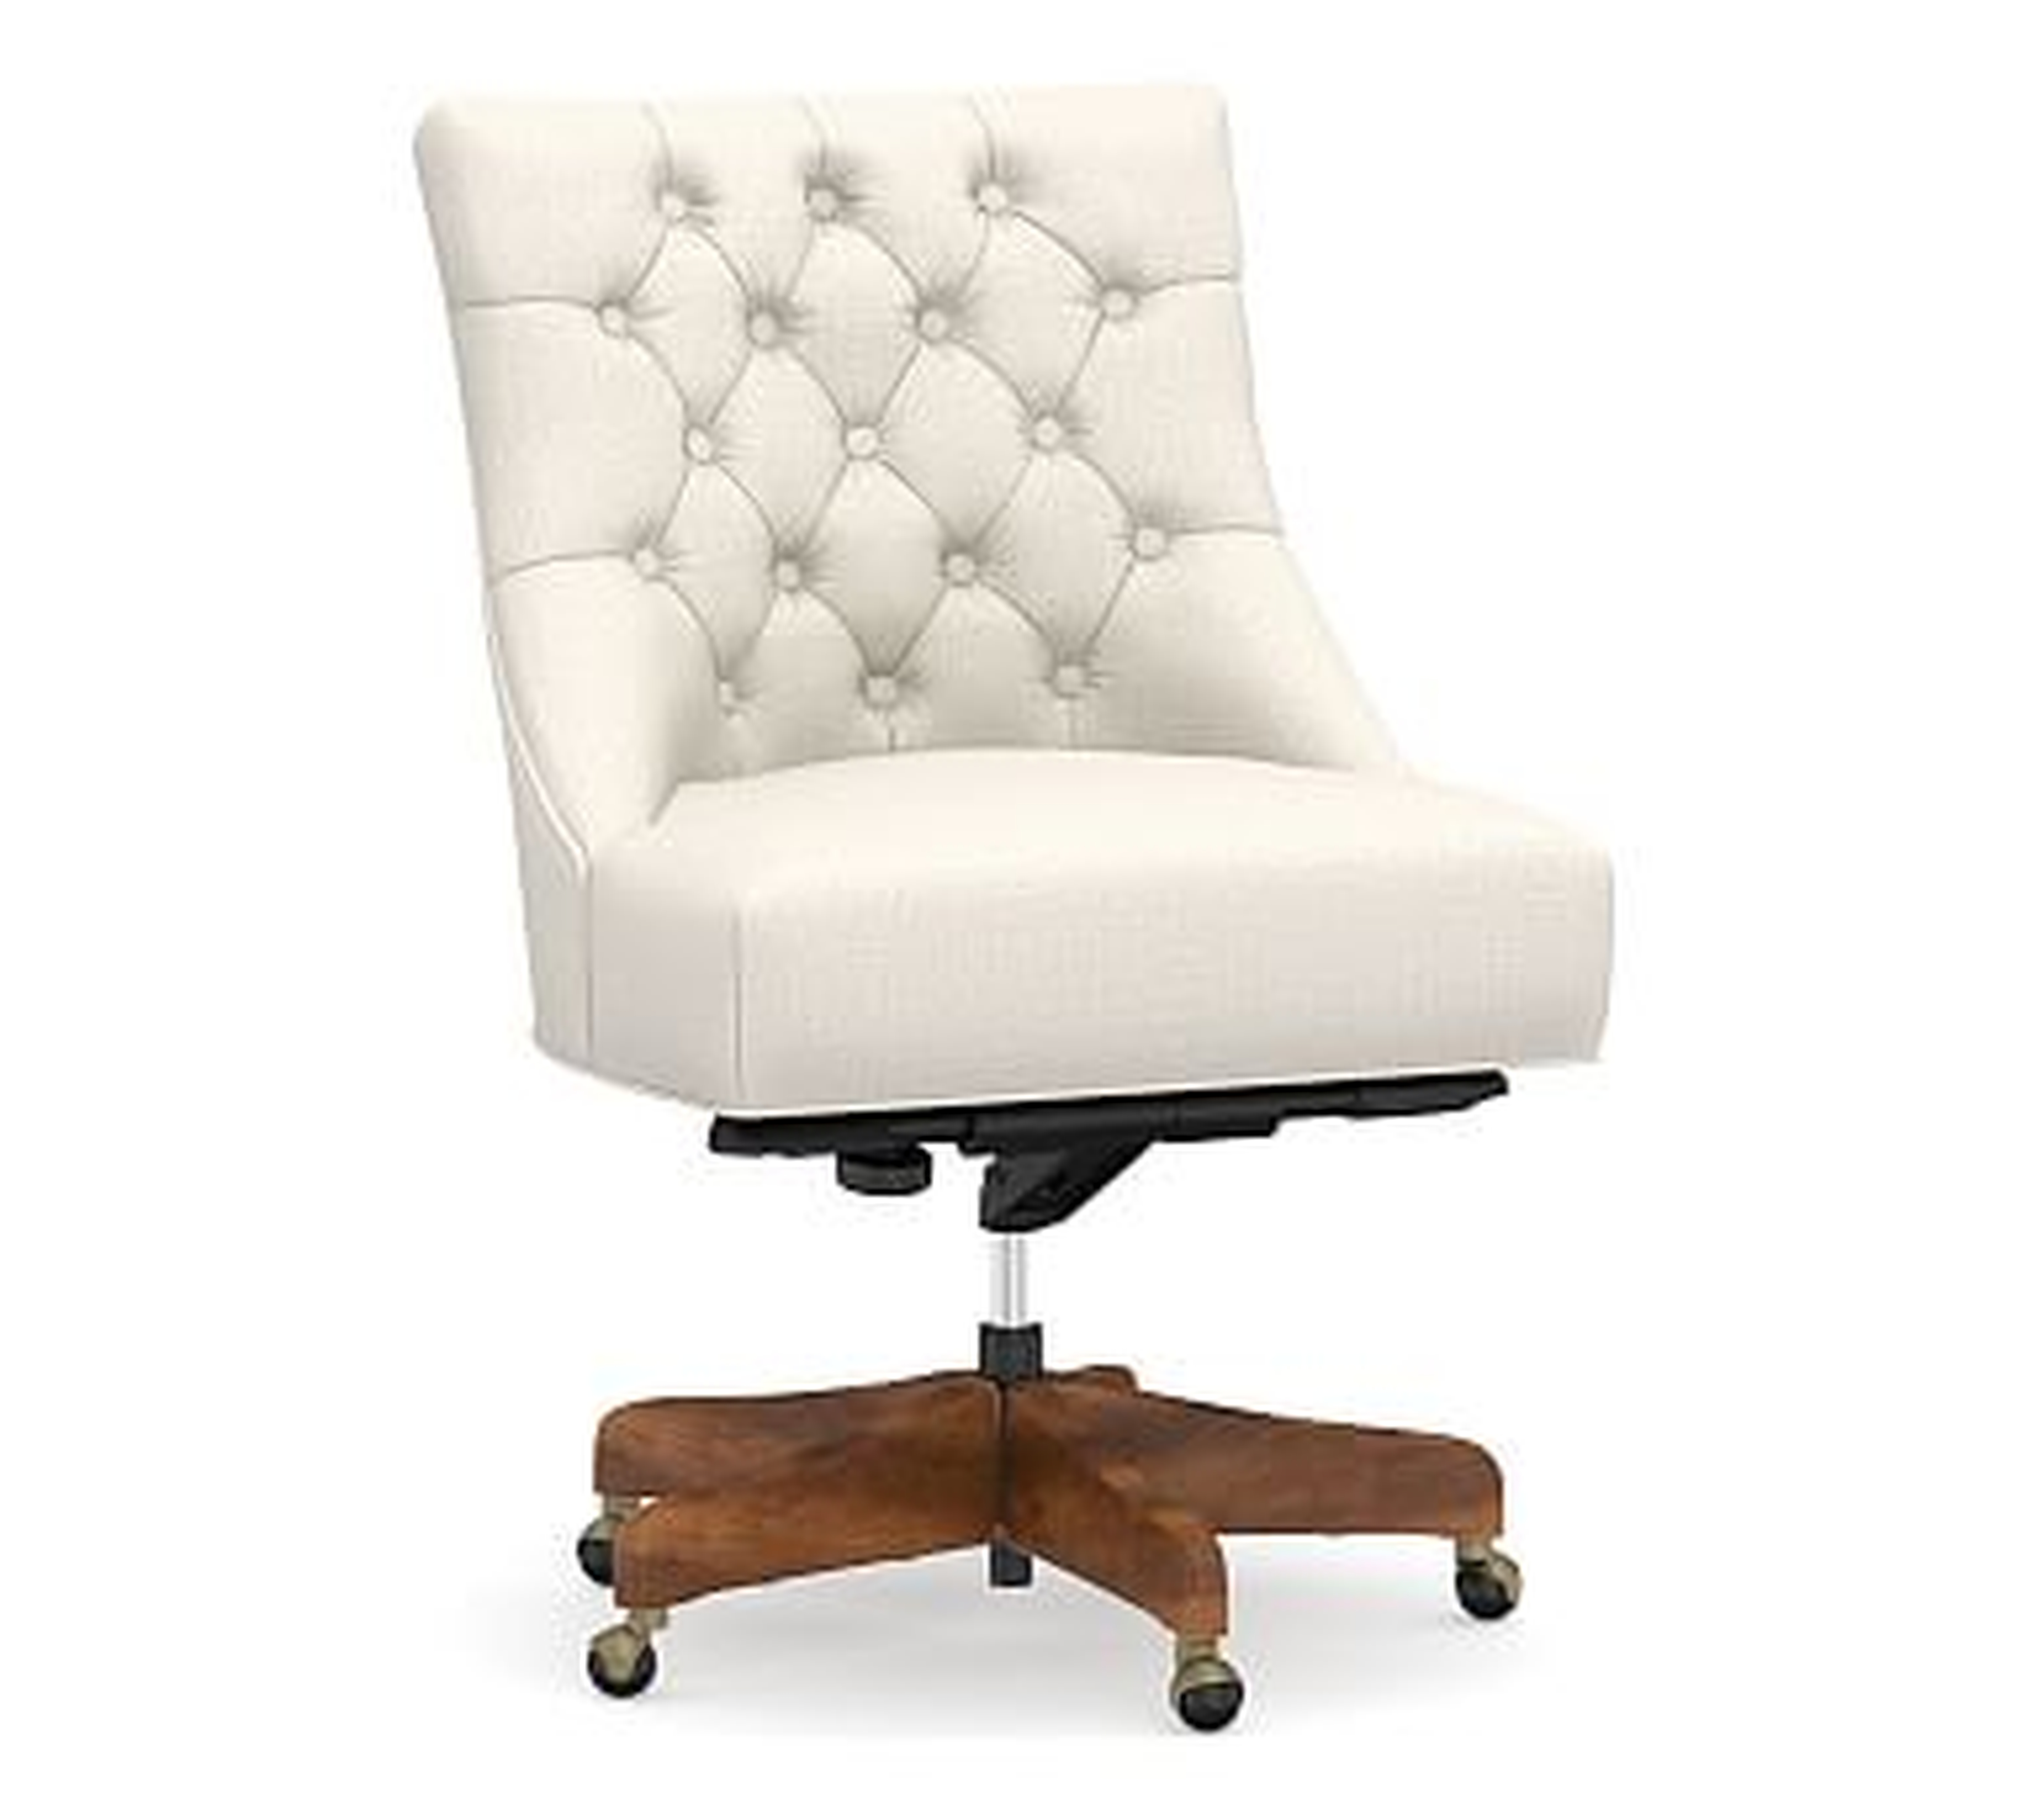 Hayes Upholstered Tufted Swivel Desk Chair, Rustic Brown Base, Performance Heathered Tweed Ivory - Pottery Barn